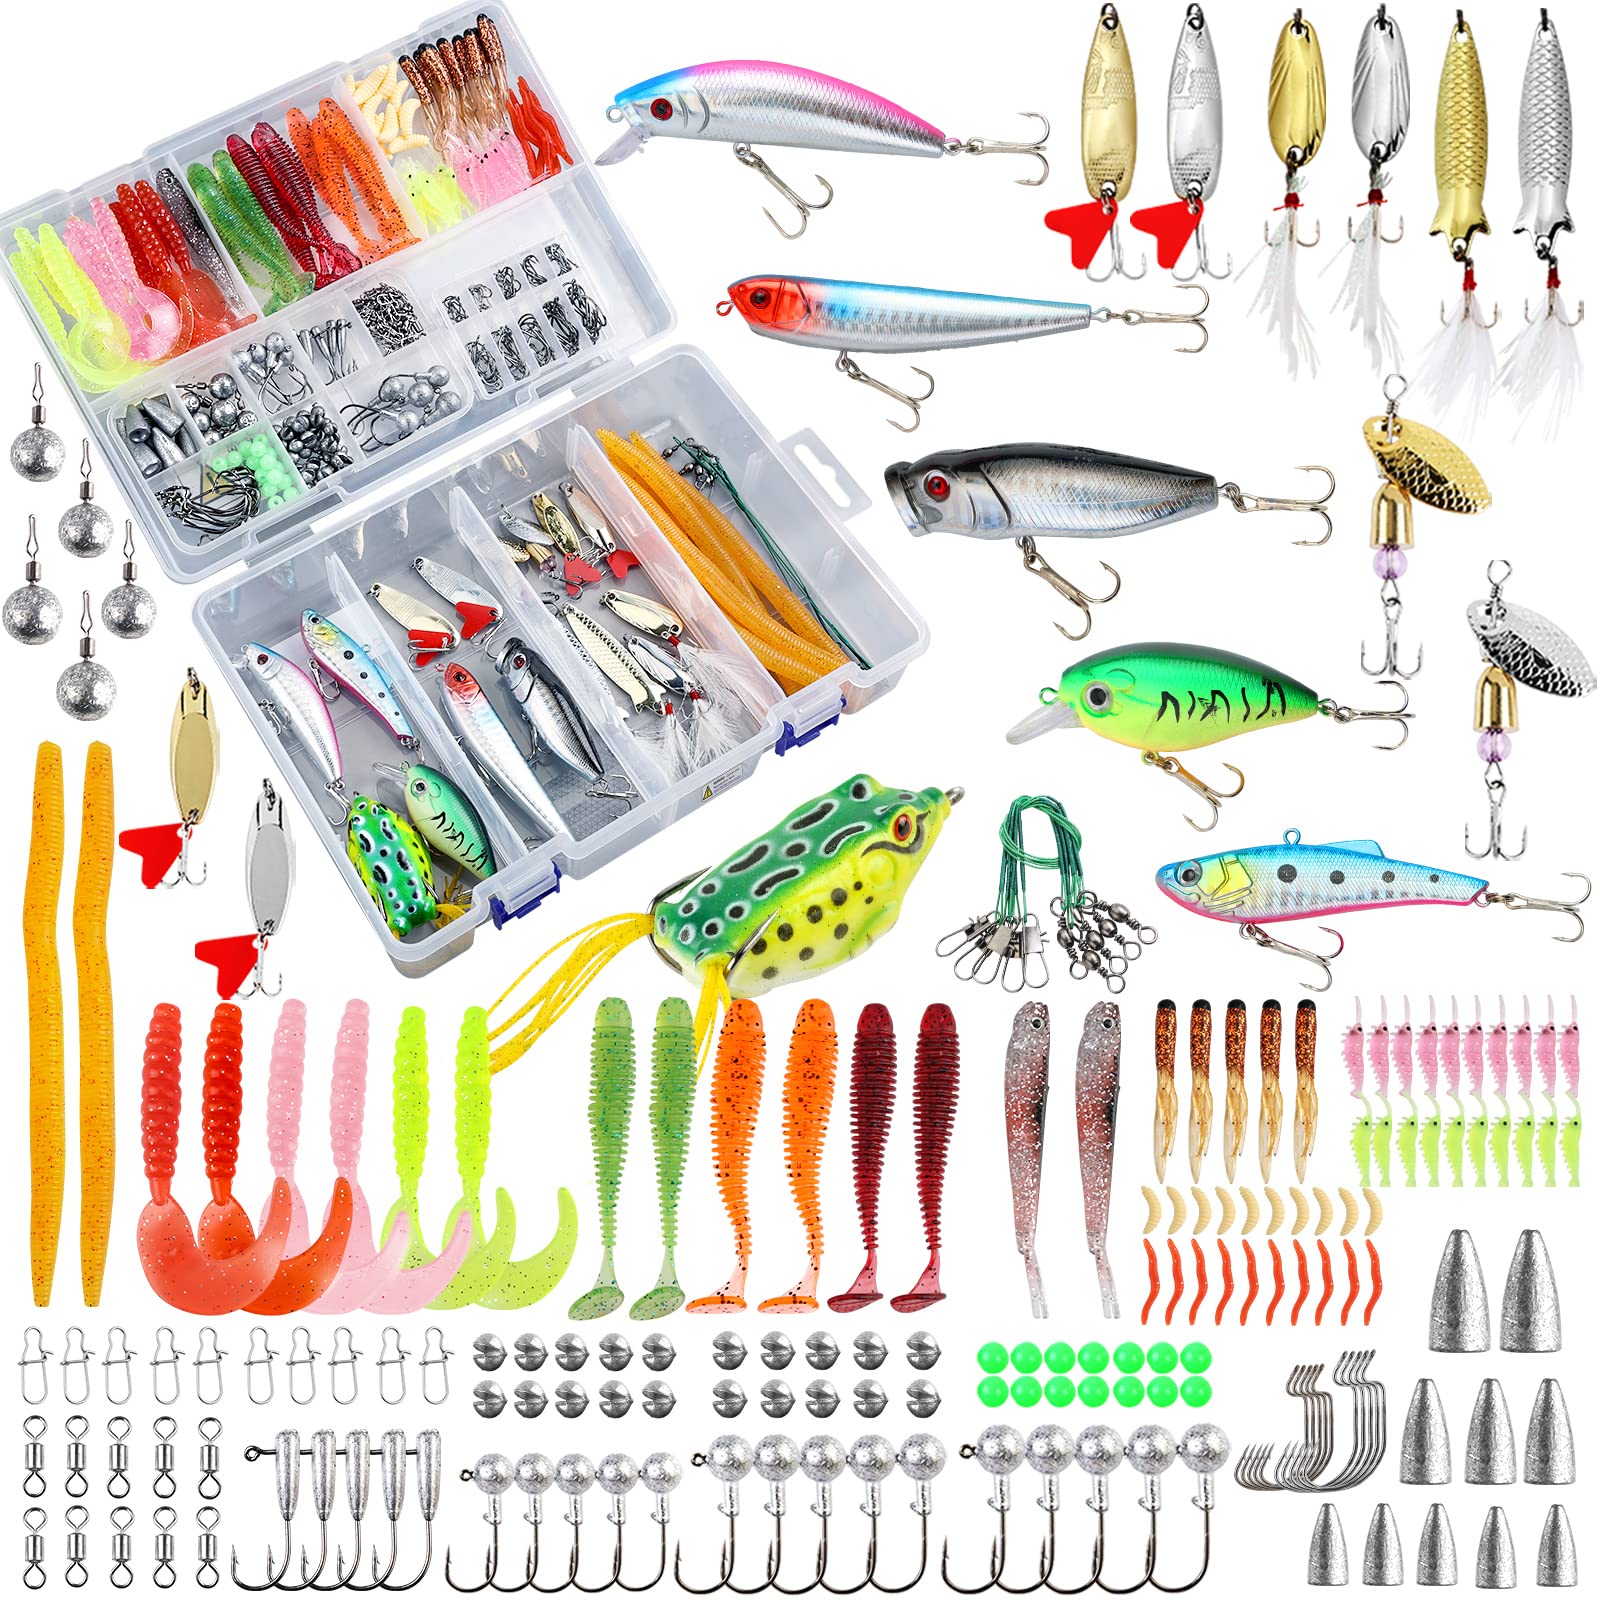 TCMBY 327PCS Fishing Lure Tackle Bait Kit Set for Freshwater